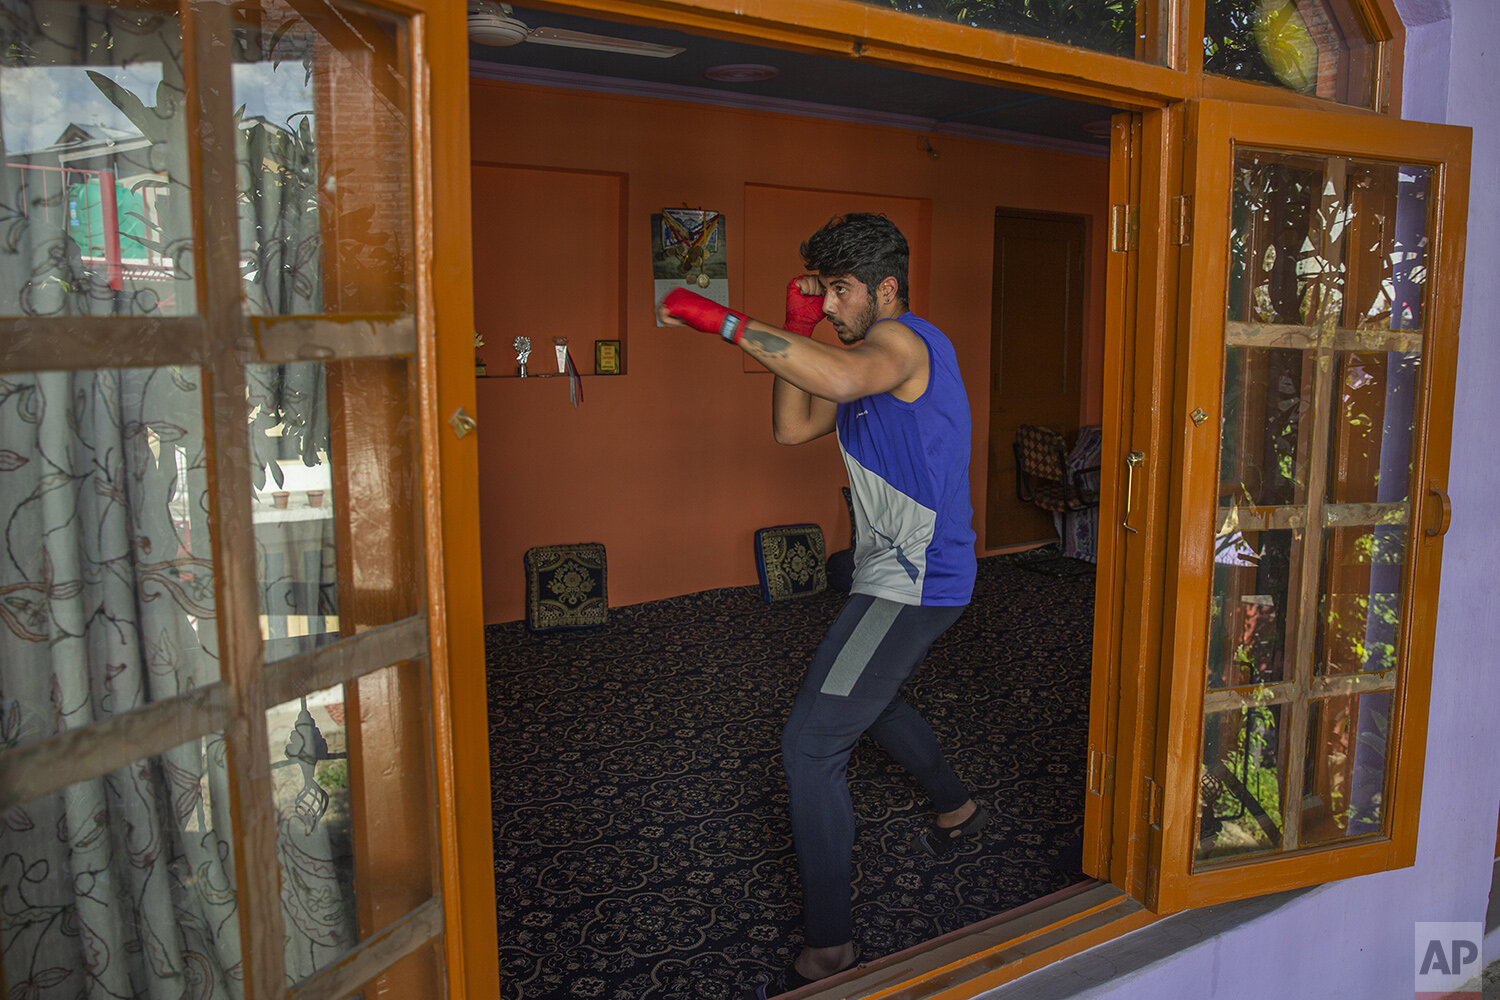  Kashmiri boxer Eyed Akeel Khan practices inside his house in Srinagar, Indian controlled Kashmir, April 23, 2020. Like many other athletes, the coronavirus pandemic has restricted Khan to his home. But lockdown for the 7 million residents of Kashmir